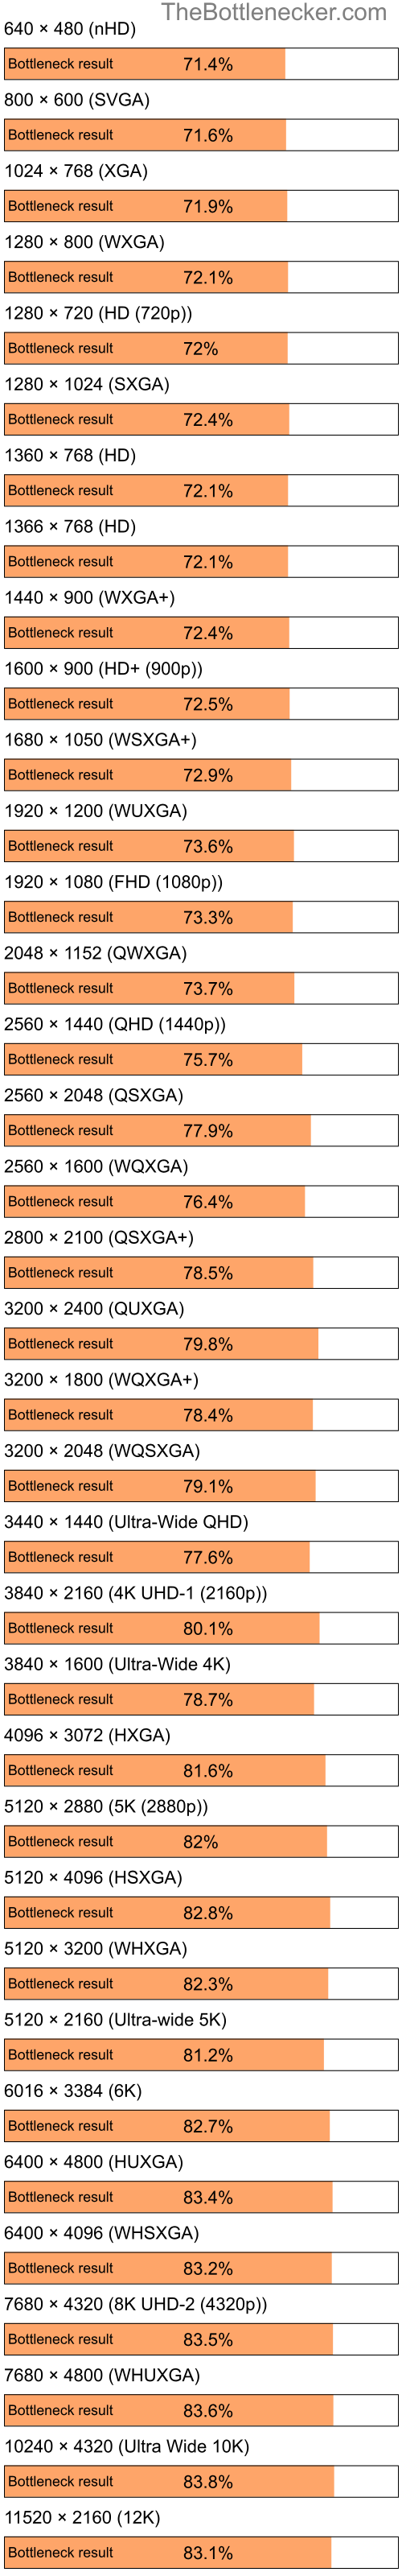 Bottleneck results by resolution for Intel Atom N270 and AMD Mobility Radeon 9700 in Processor Intense Tasks